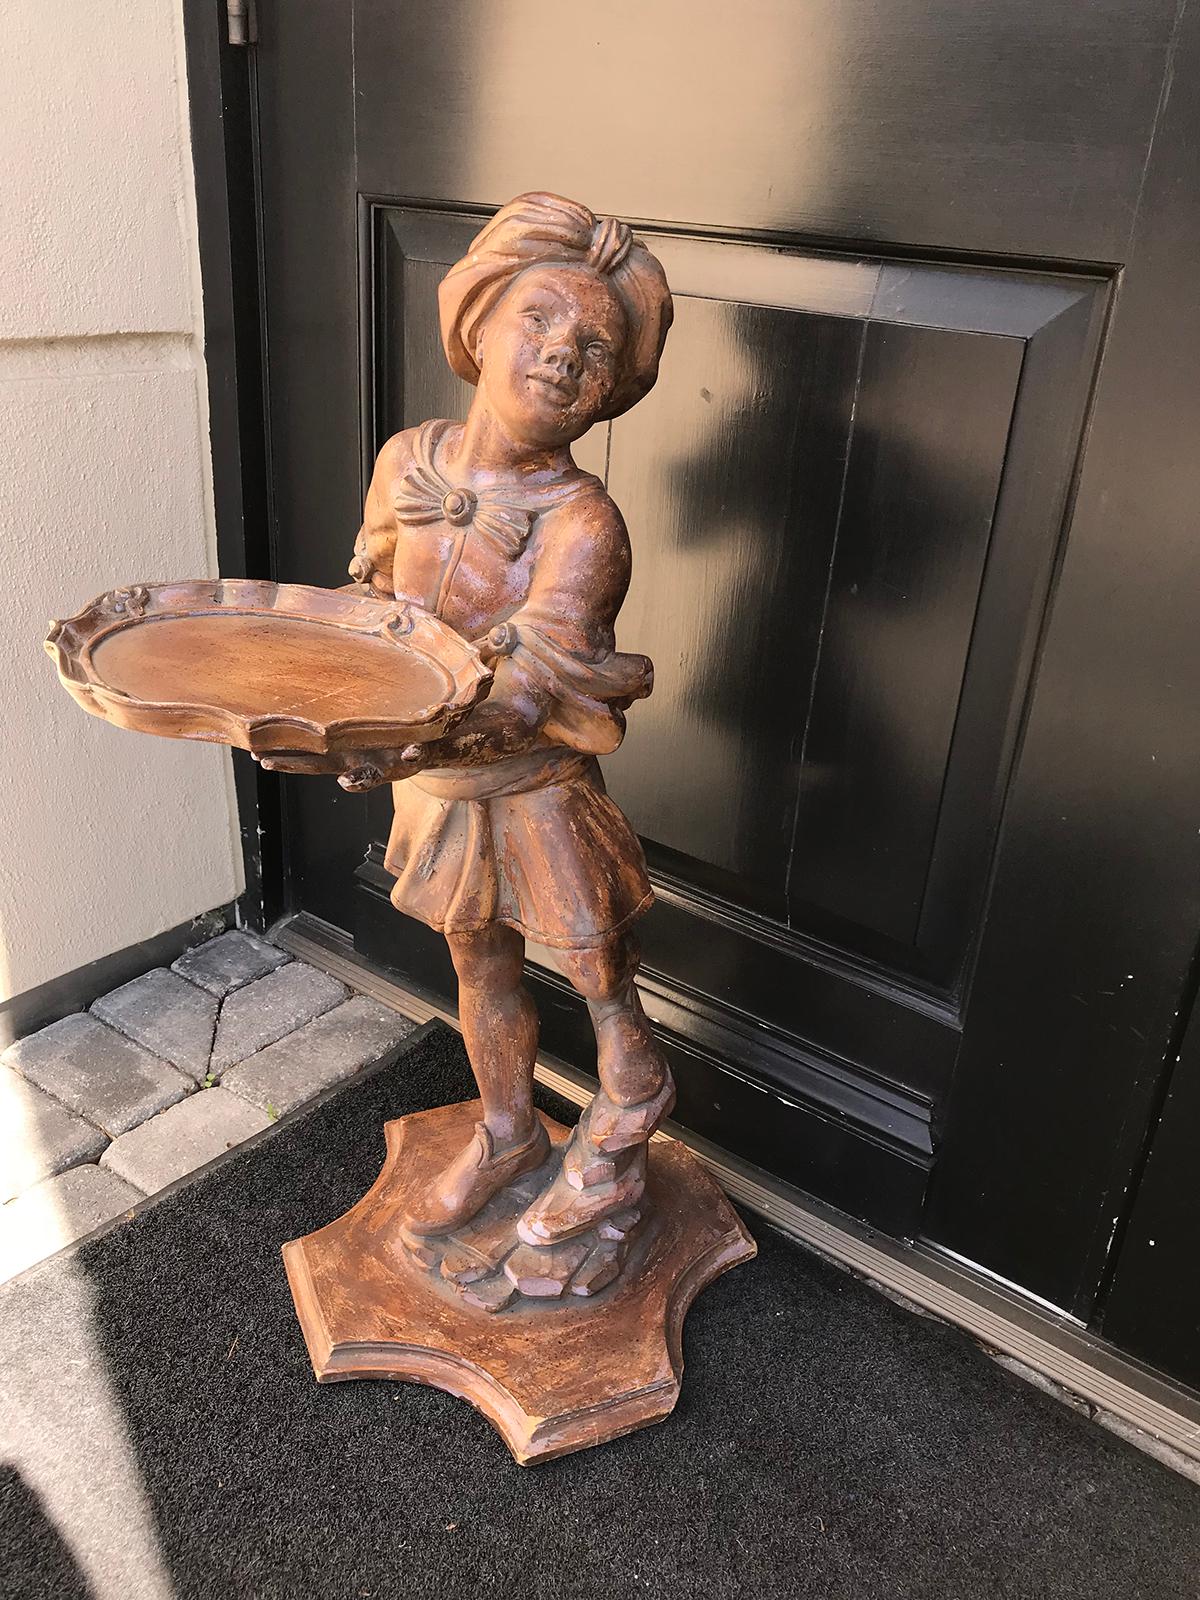 20th century Italian carved wood figure statue of boy with serving tray
Measures: Base 13.5